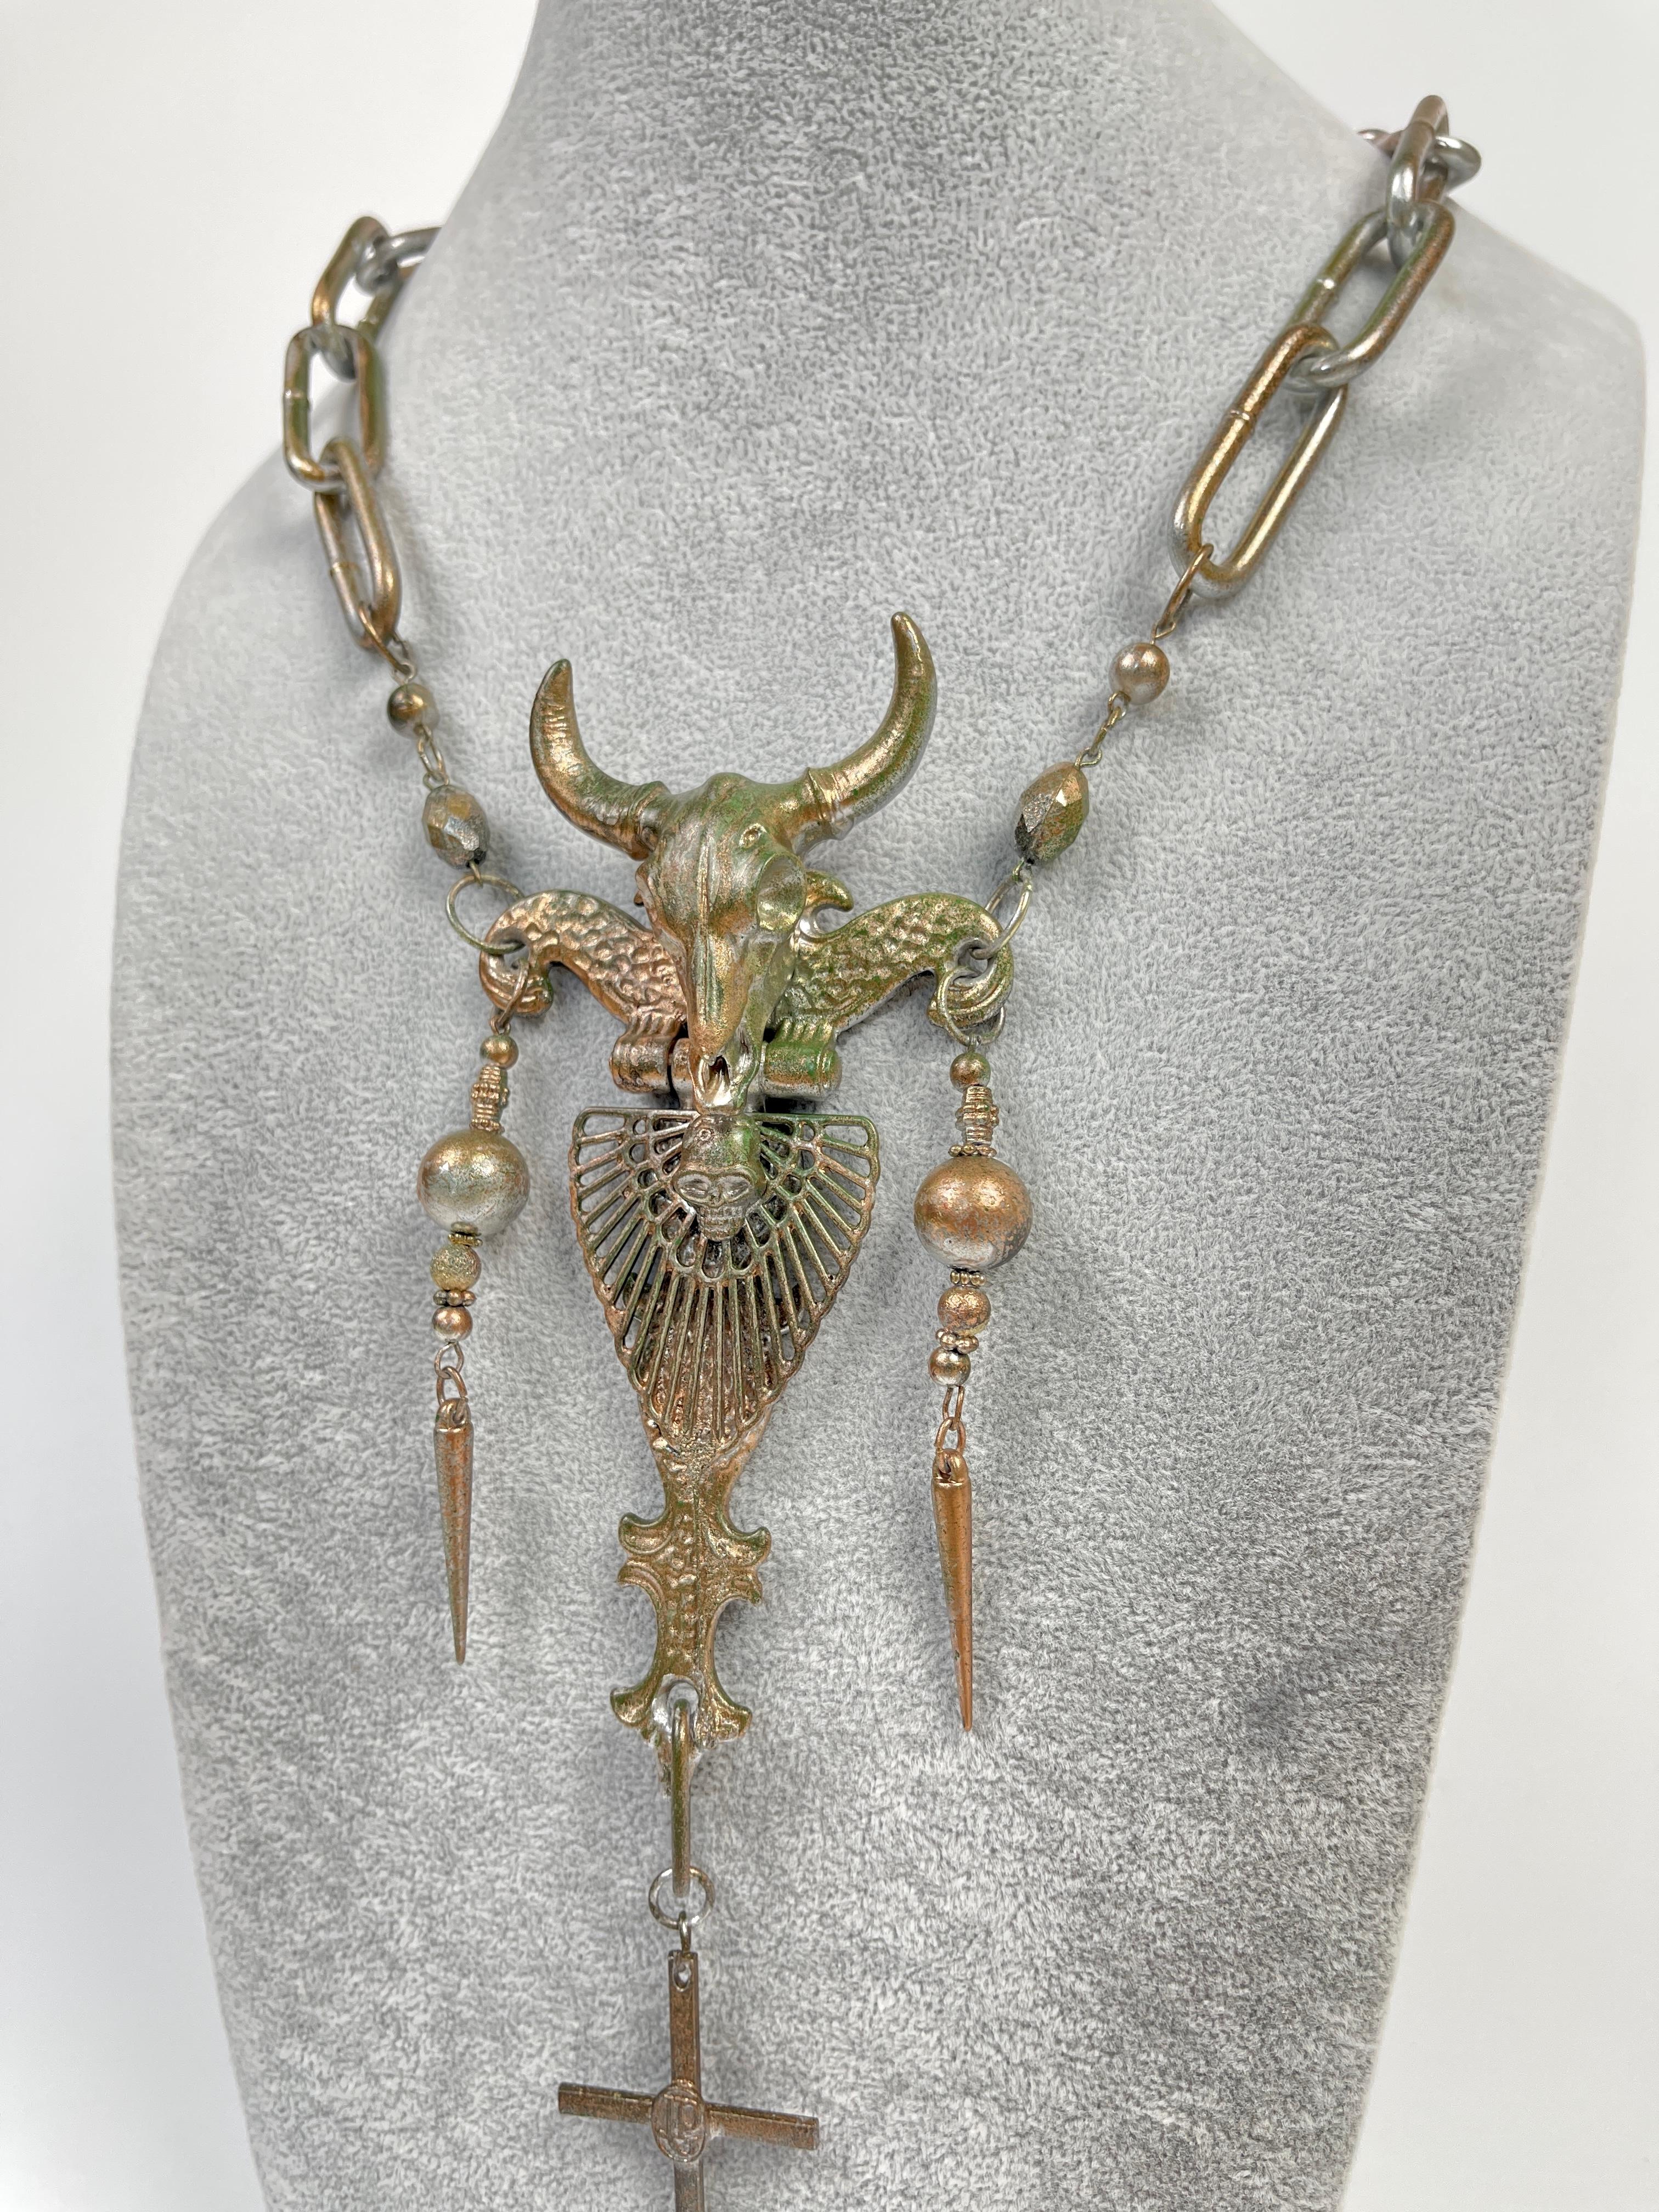 Jean Paul Gaultier 1990's Staff Sample Rosario Bull Necklace For Sale 7